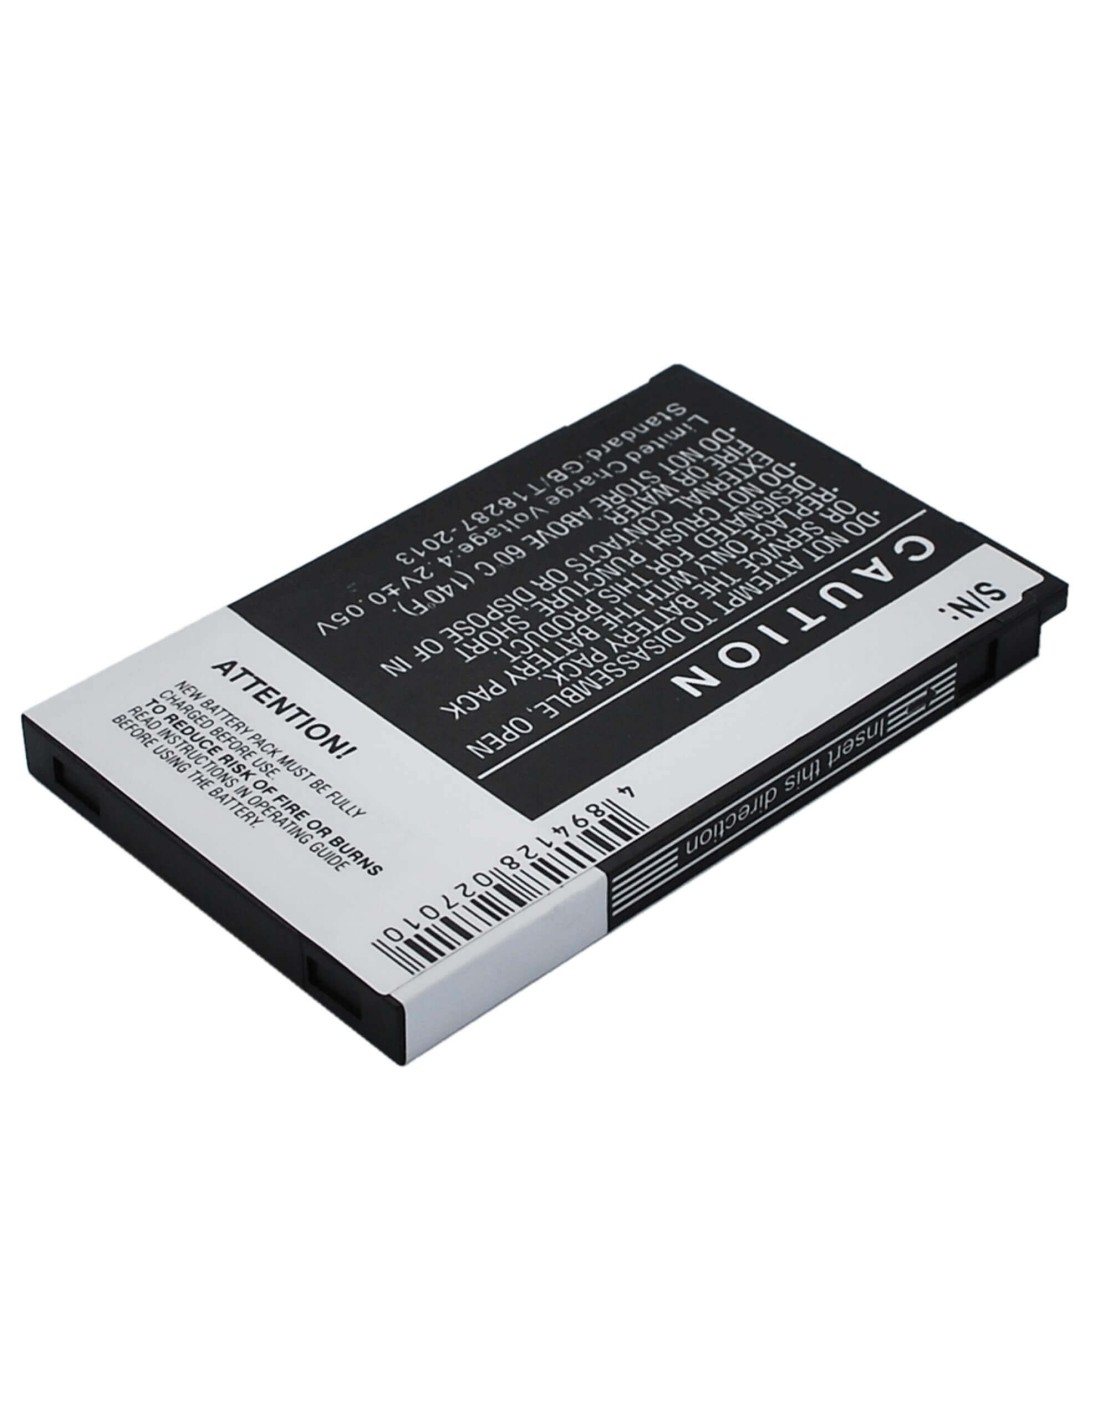 Battery for HTC Touch Dual 850, Touch Dual P5310, Neon 200 3.7V, 1350mAh - 5.00Wh